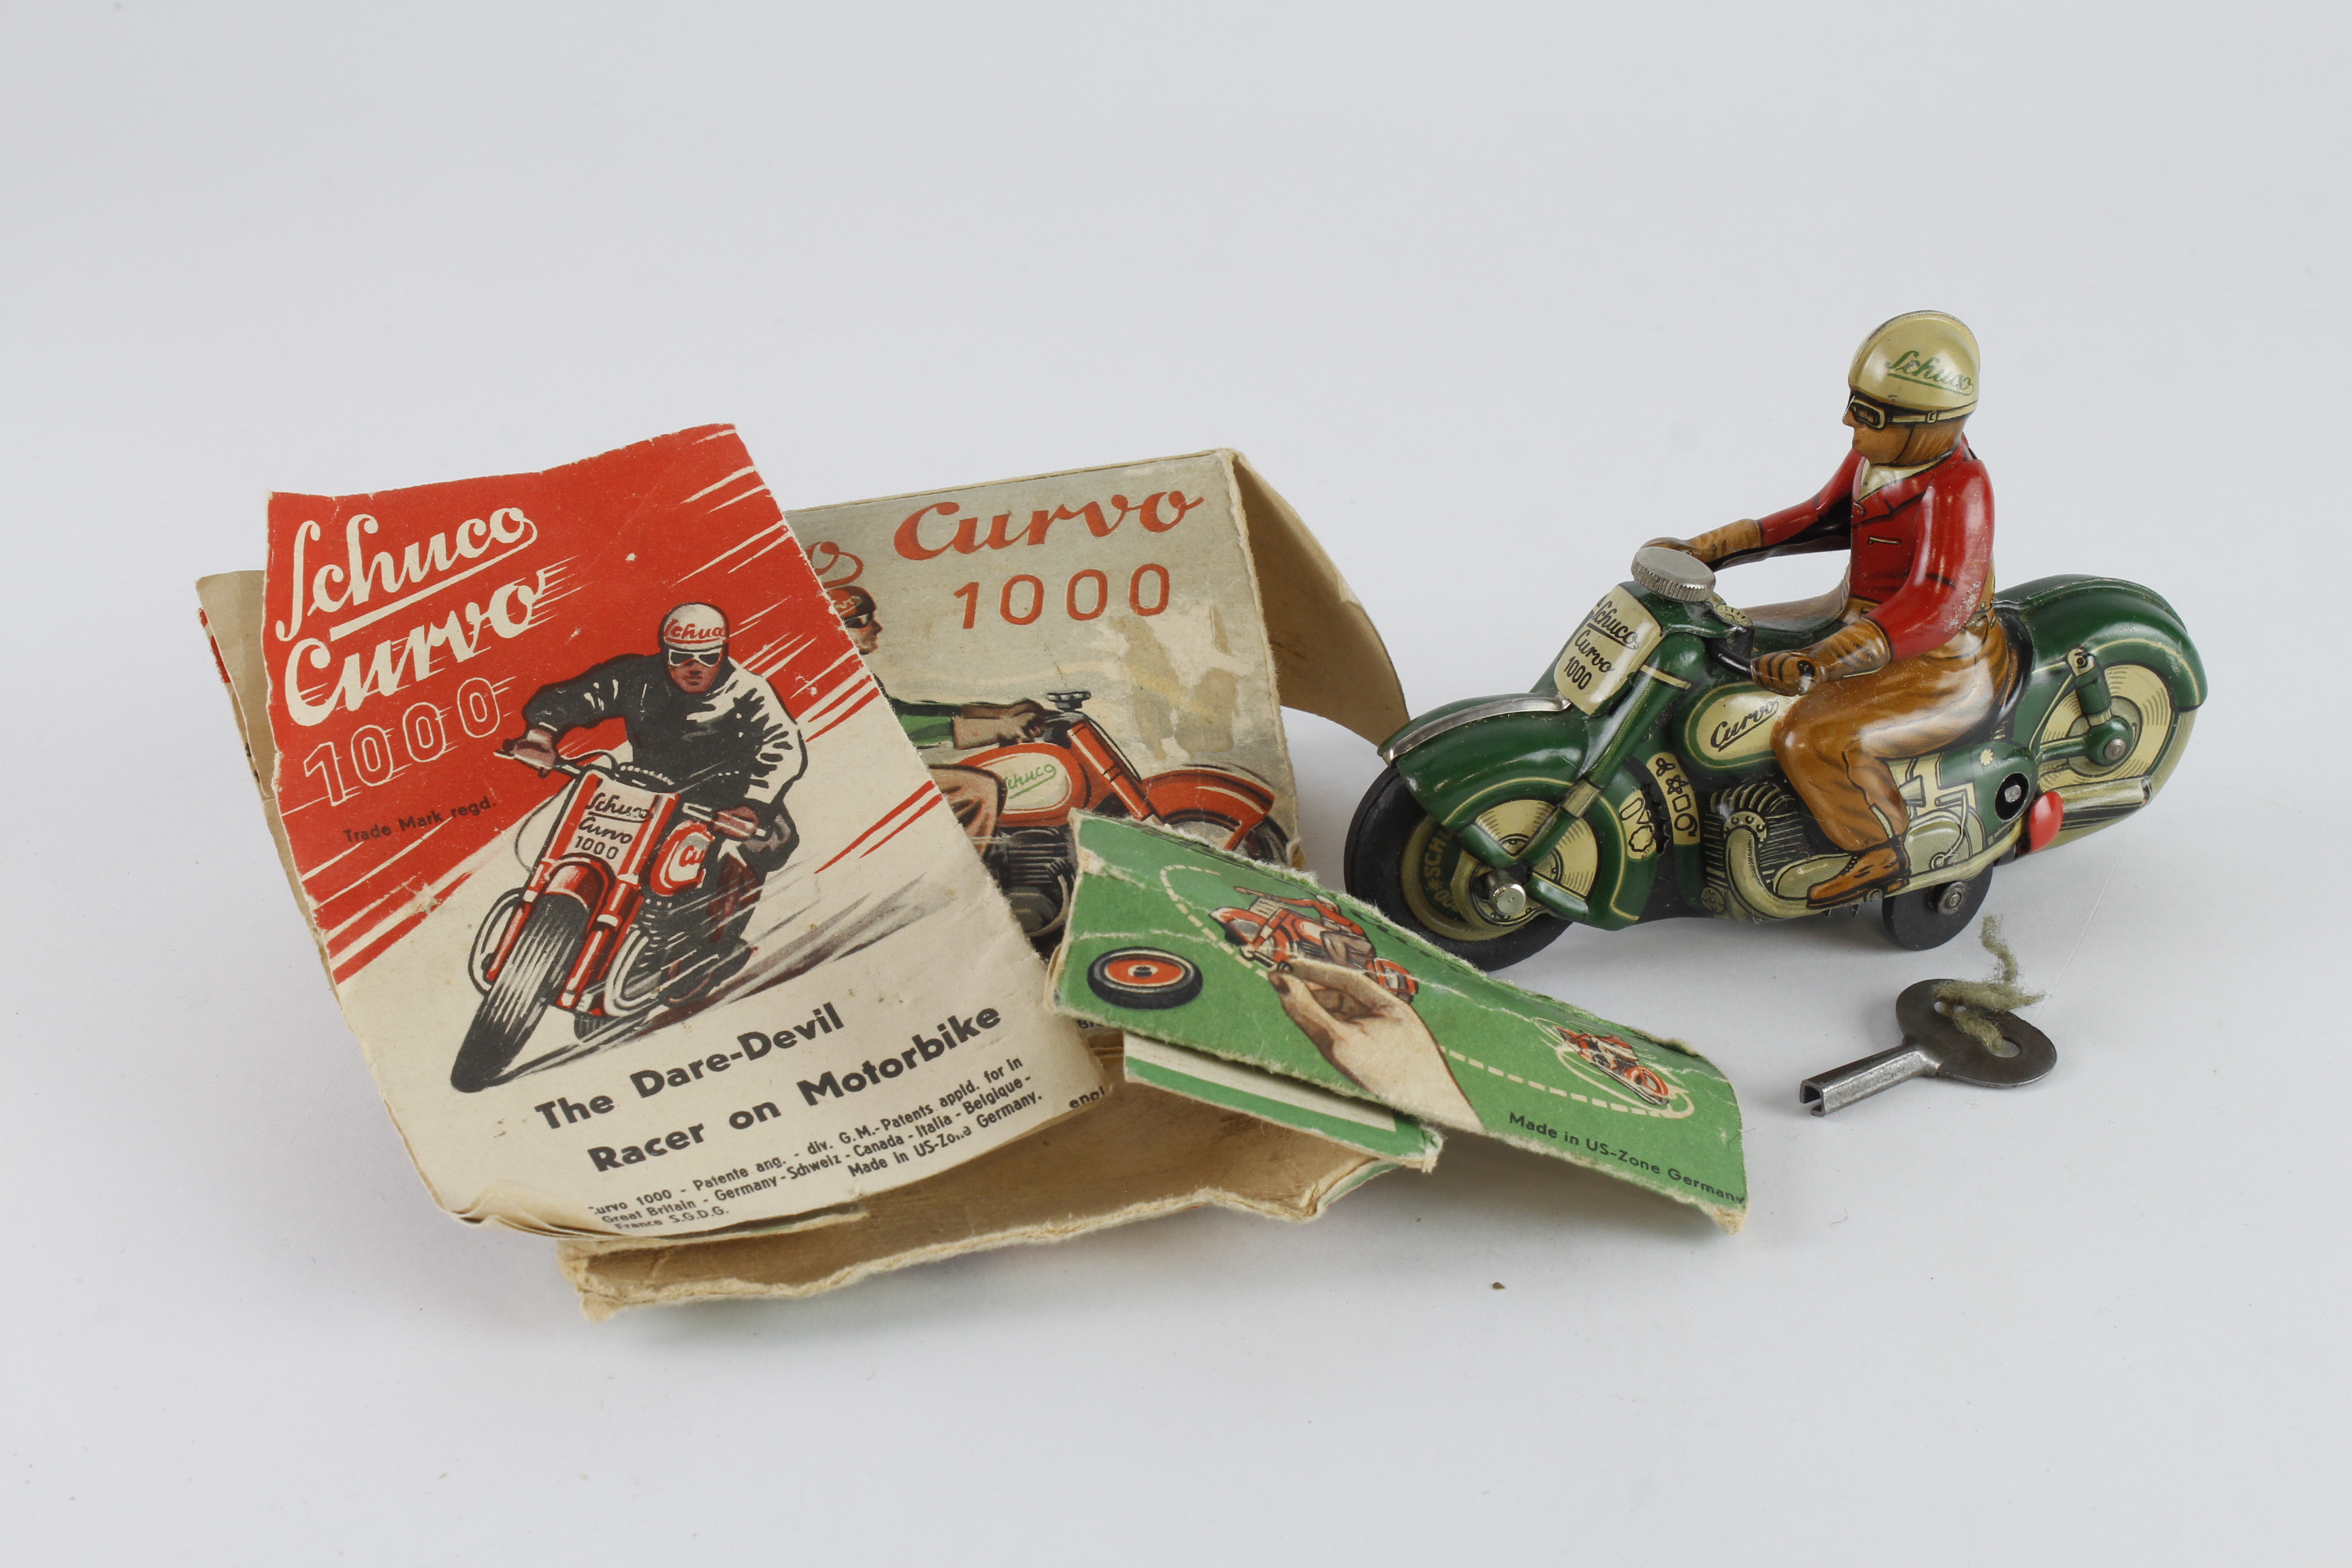 Schuco Curvo 1000 tinplate clockwork motorcycle and rider, comes with original instructions and